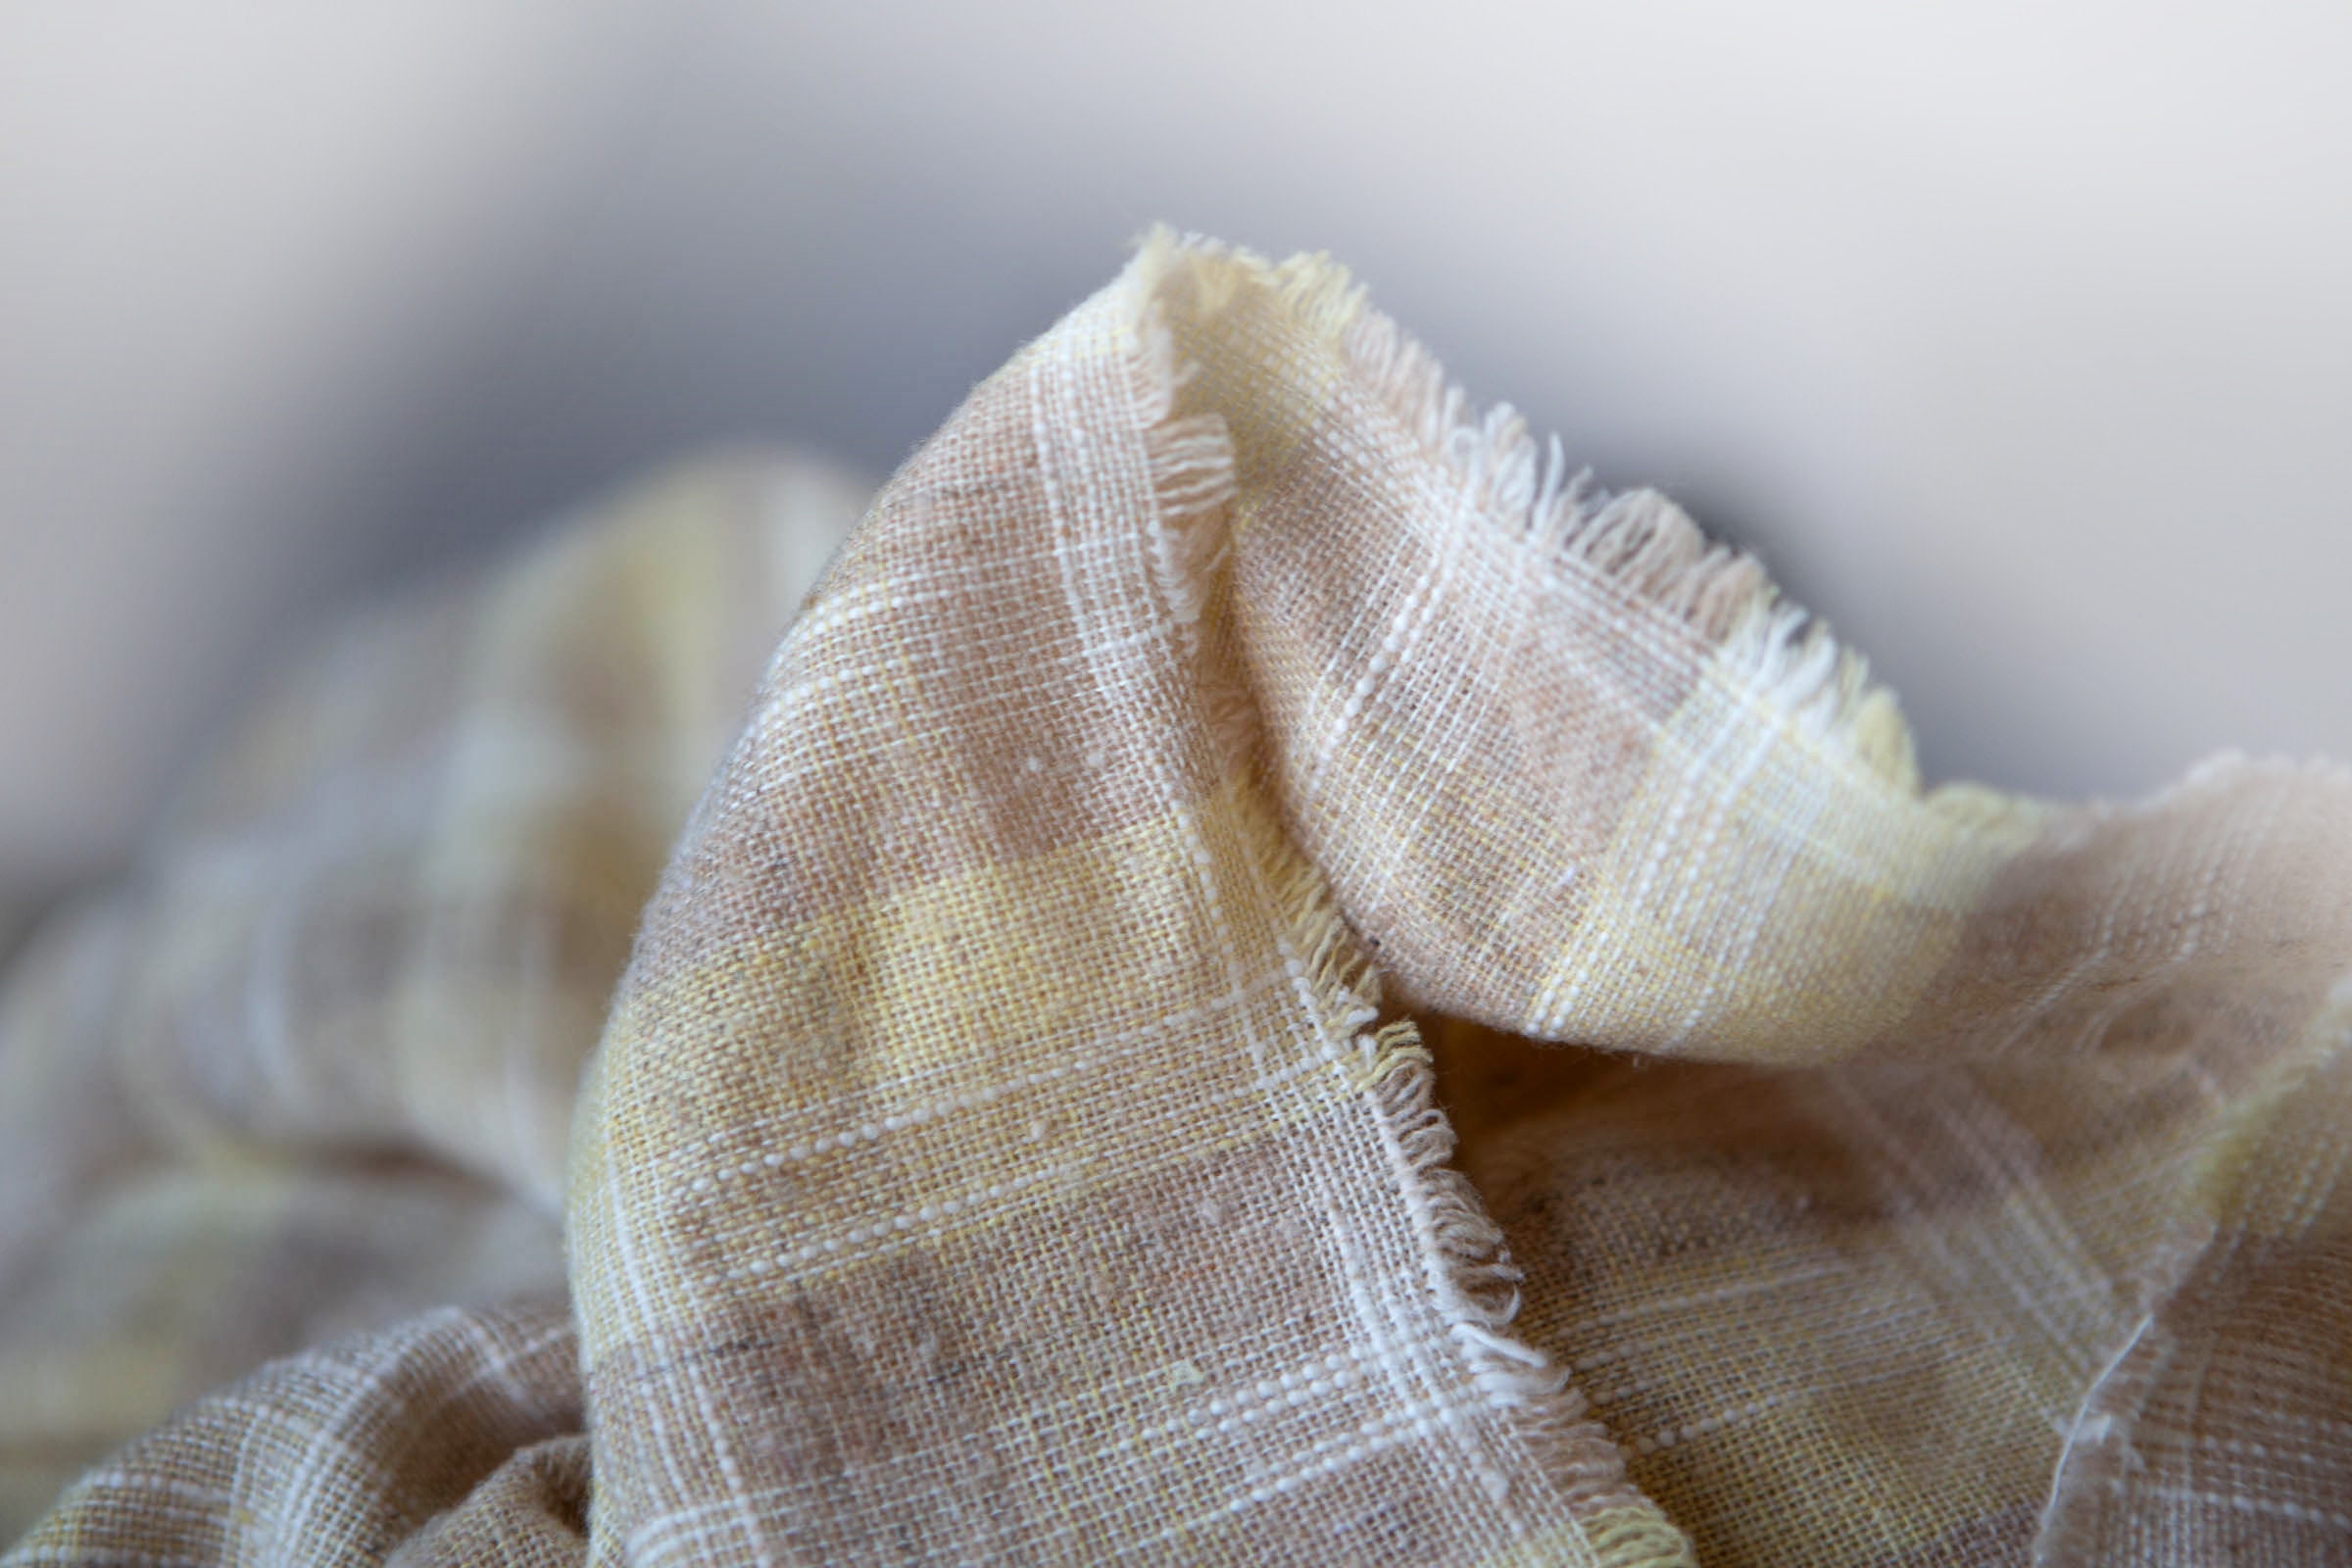 Vintage Wool Synthetic Blend Woven Plaid Lightweight Fabric - Pale Yellow & Beige Checked Pattern. Nubby Textured